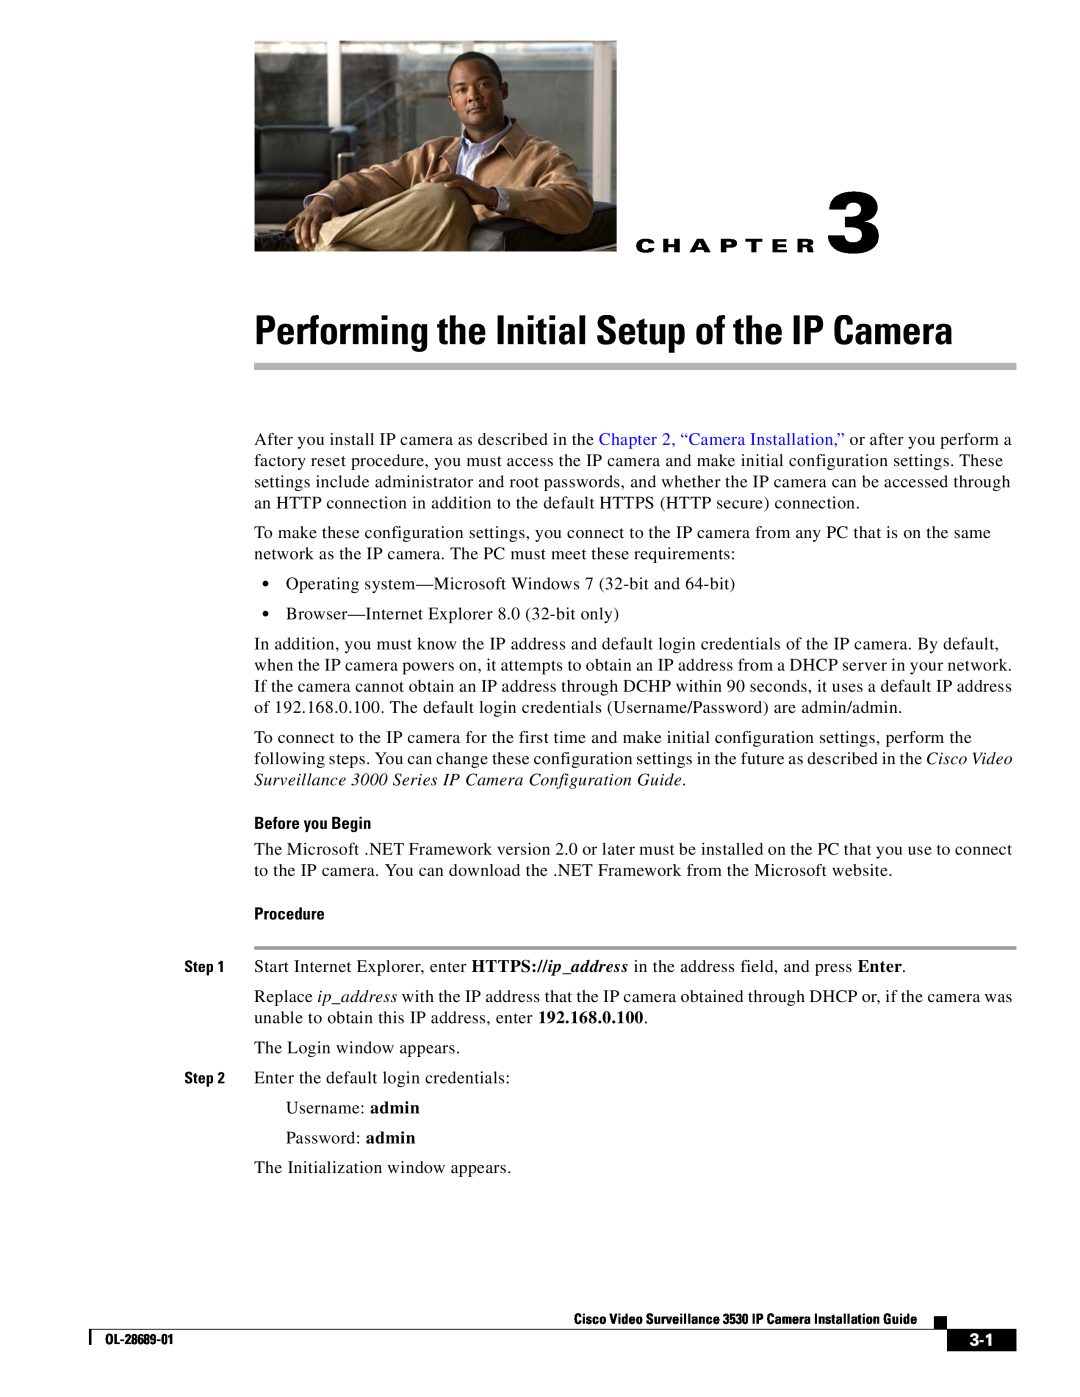 Cisco Systems 3530 manual Performing the Initial Setup of the IP Camera, C H A P T E R, Before you Begin, Procedure 